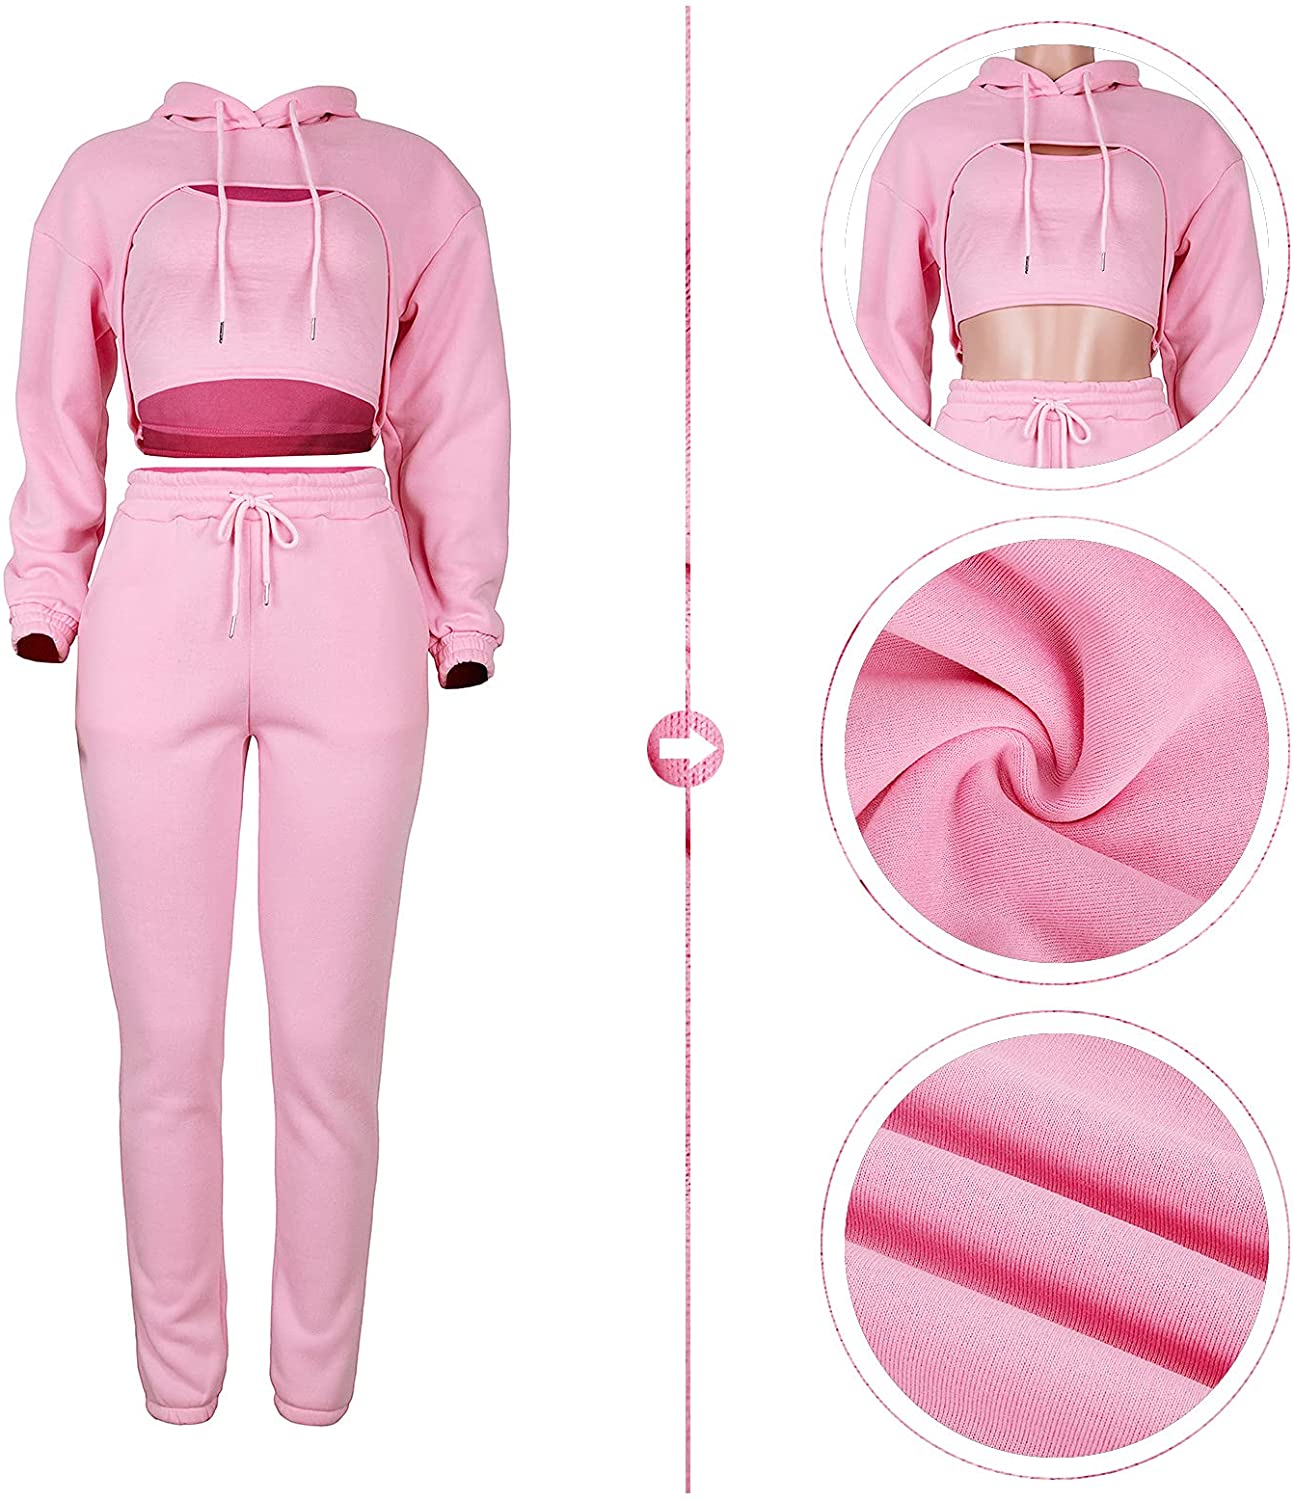 Women Fall 3 Piece Outfits Tracksuits - Sexy Long Sleeve Pullover Hoodie + Tank Top + Jogging Pants Sweatsuit Workout Sets